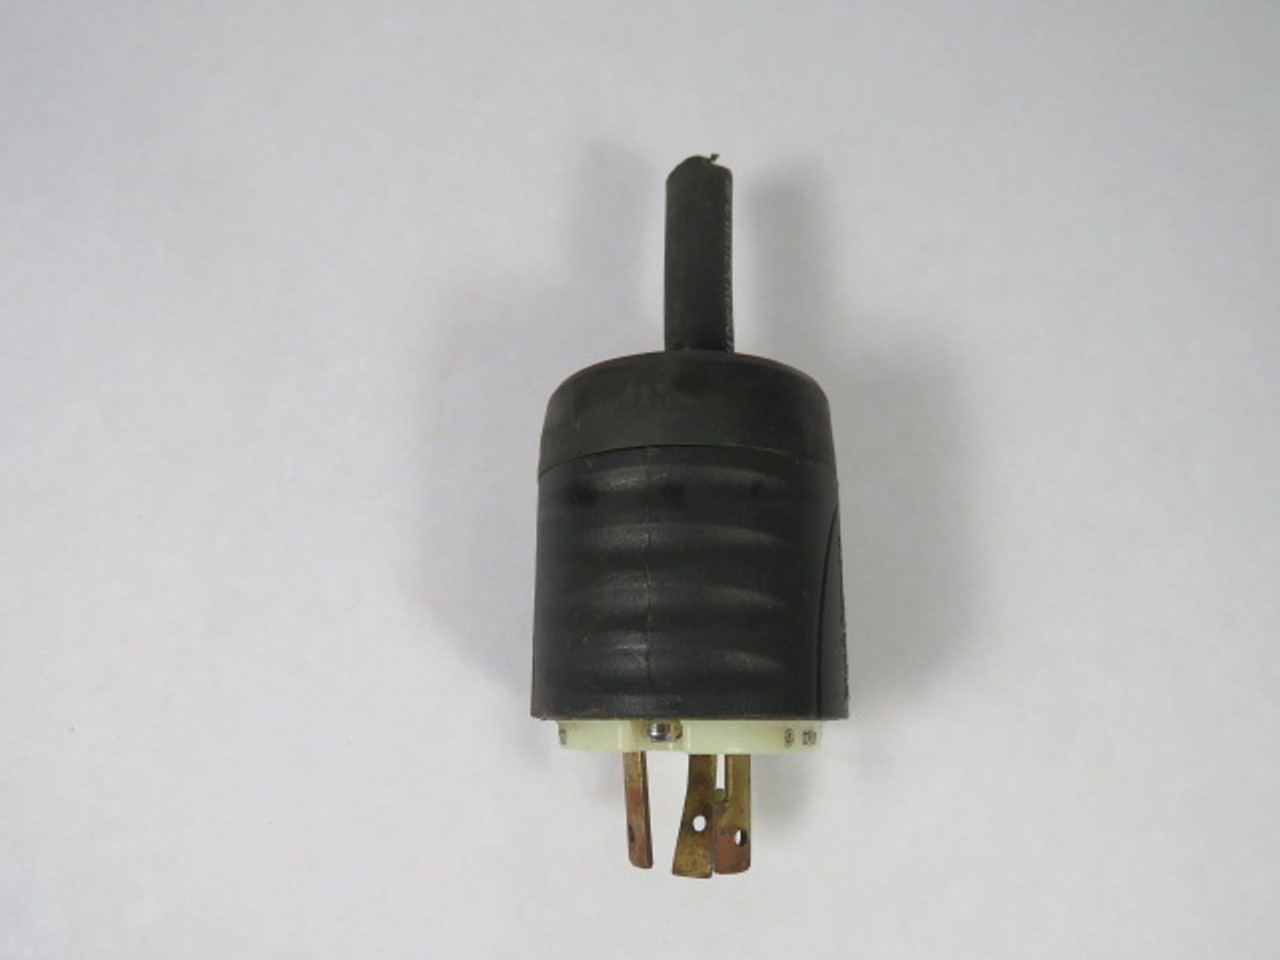 Pass & Seymour L520P Plug 20A 125V 3-Wire USED